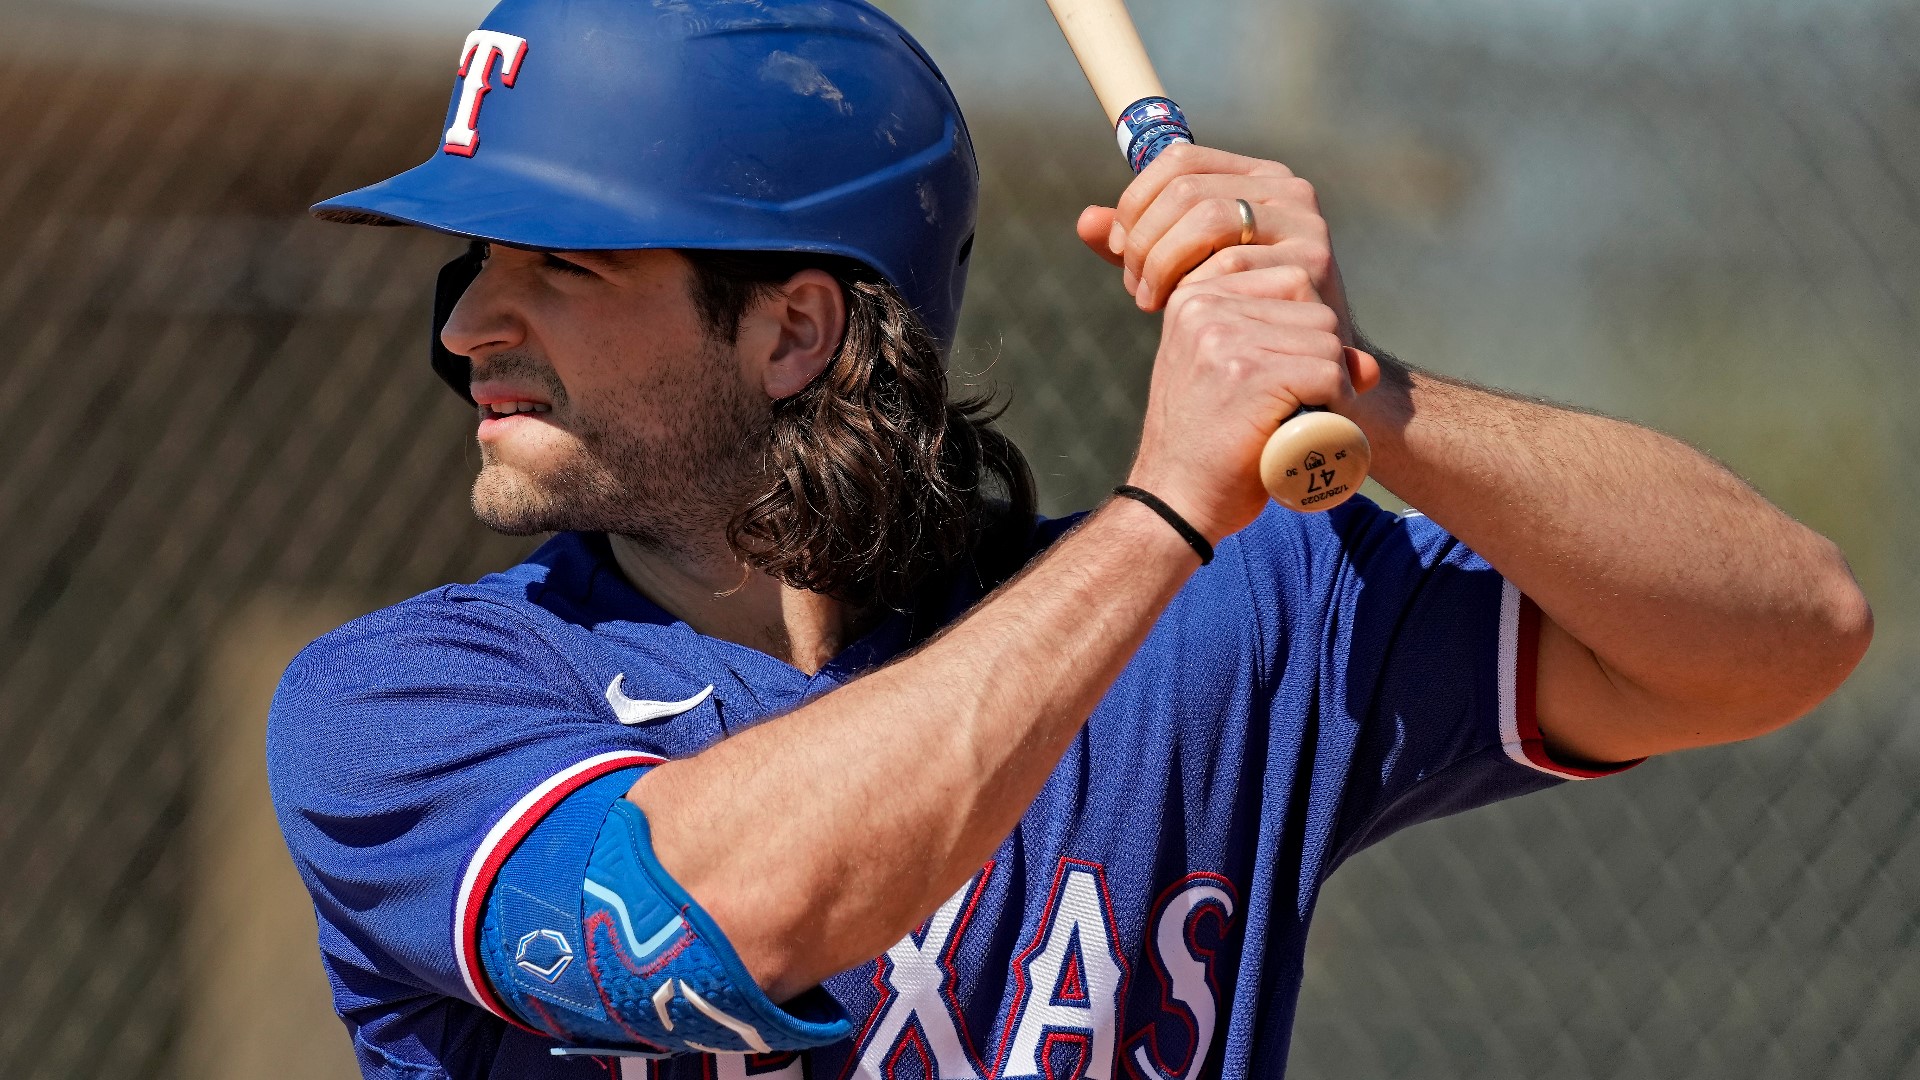 Josh Smith injury Texas Rangers outfielder hit in face by pitch wfaa